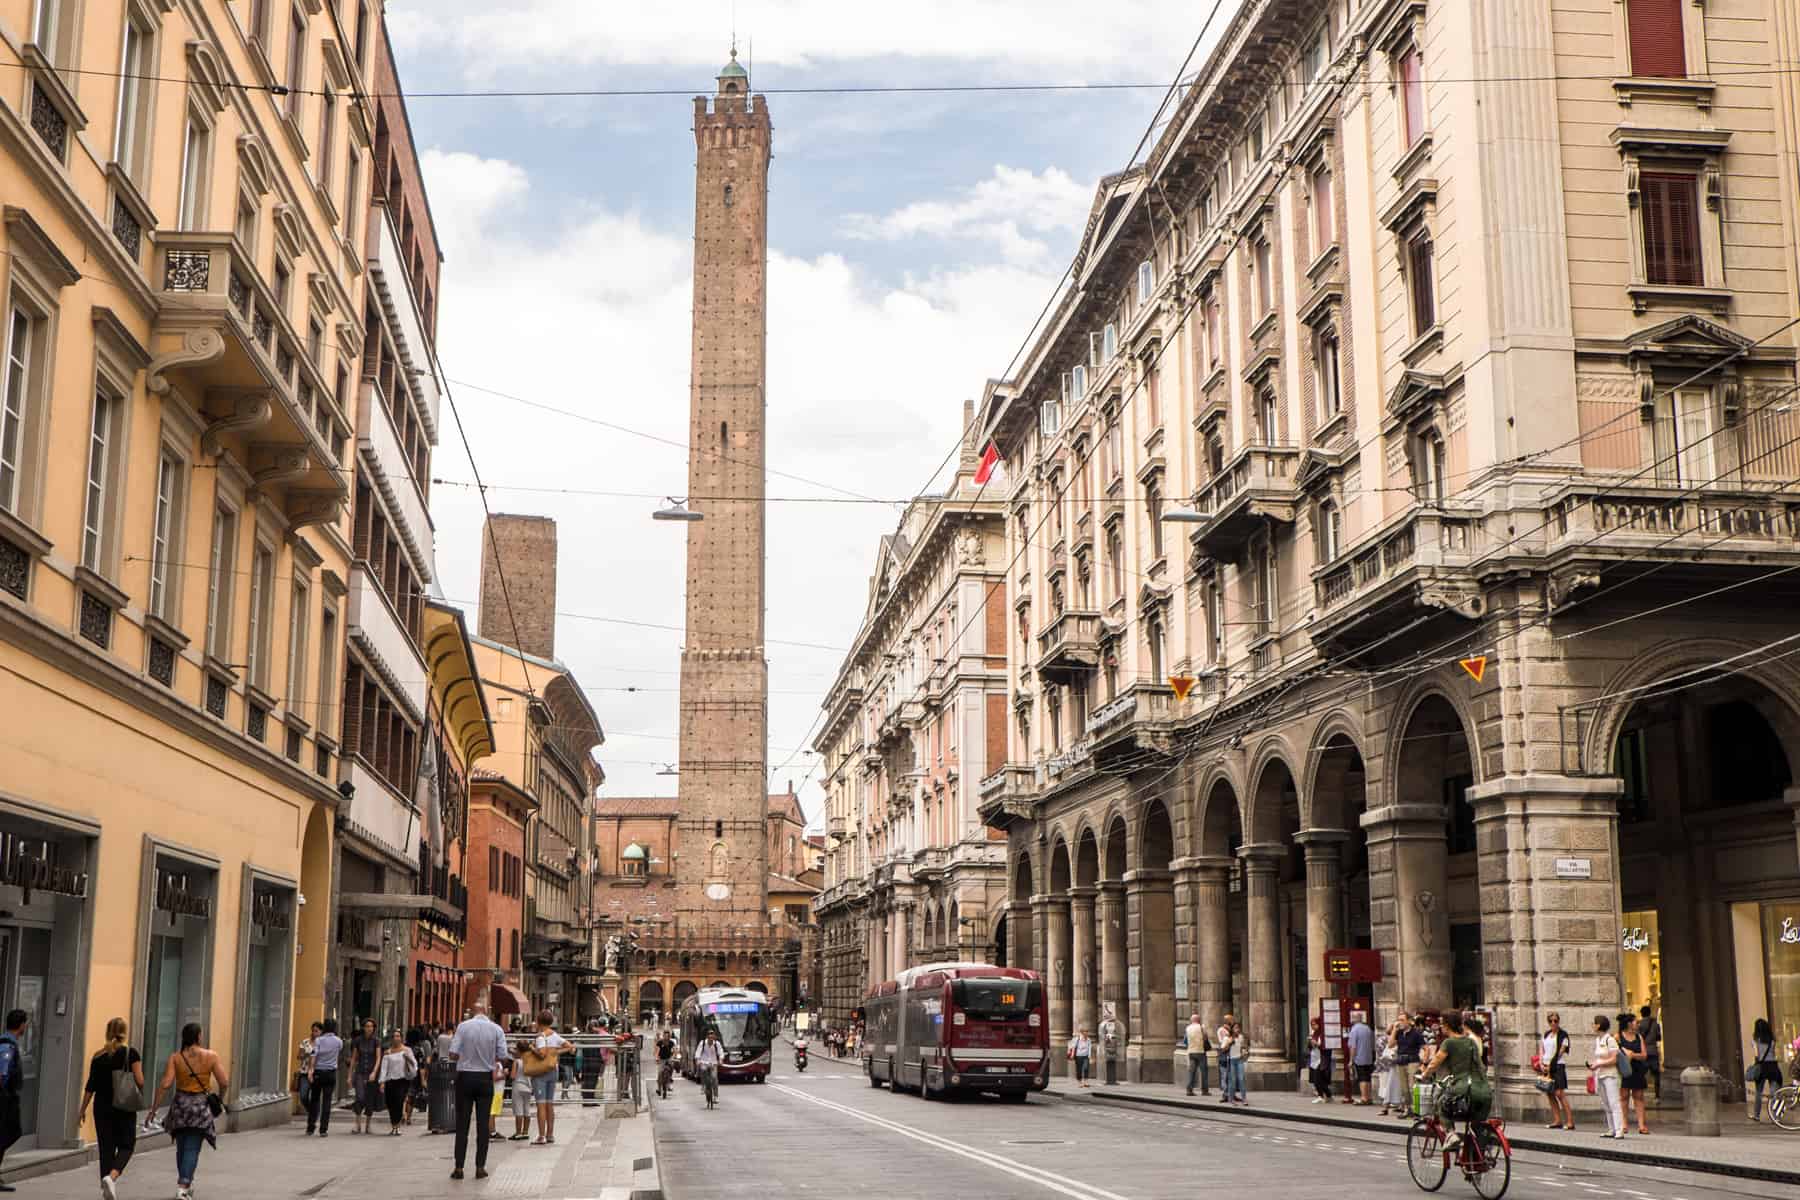 A tall medieval stone tower stands at the end of a wide street in between row of beige buildings, and dominates the skyline of Bologna.